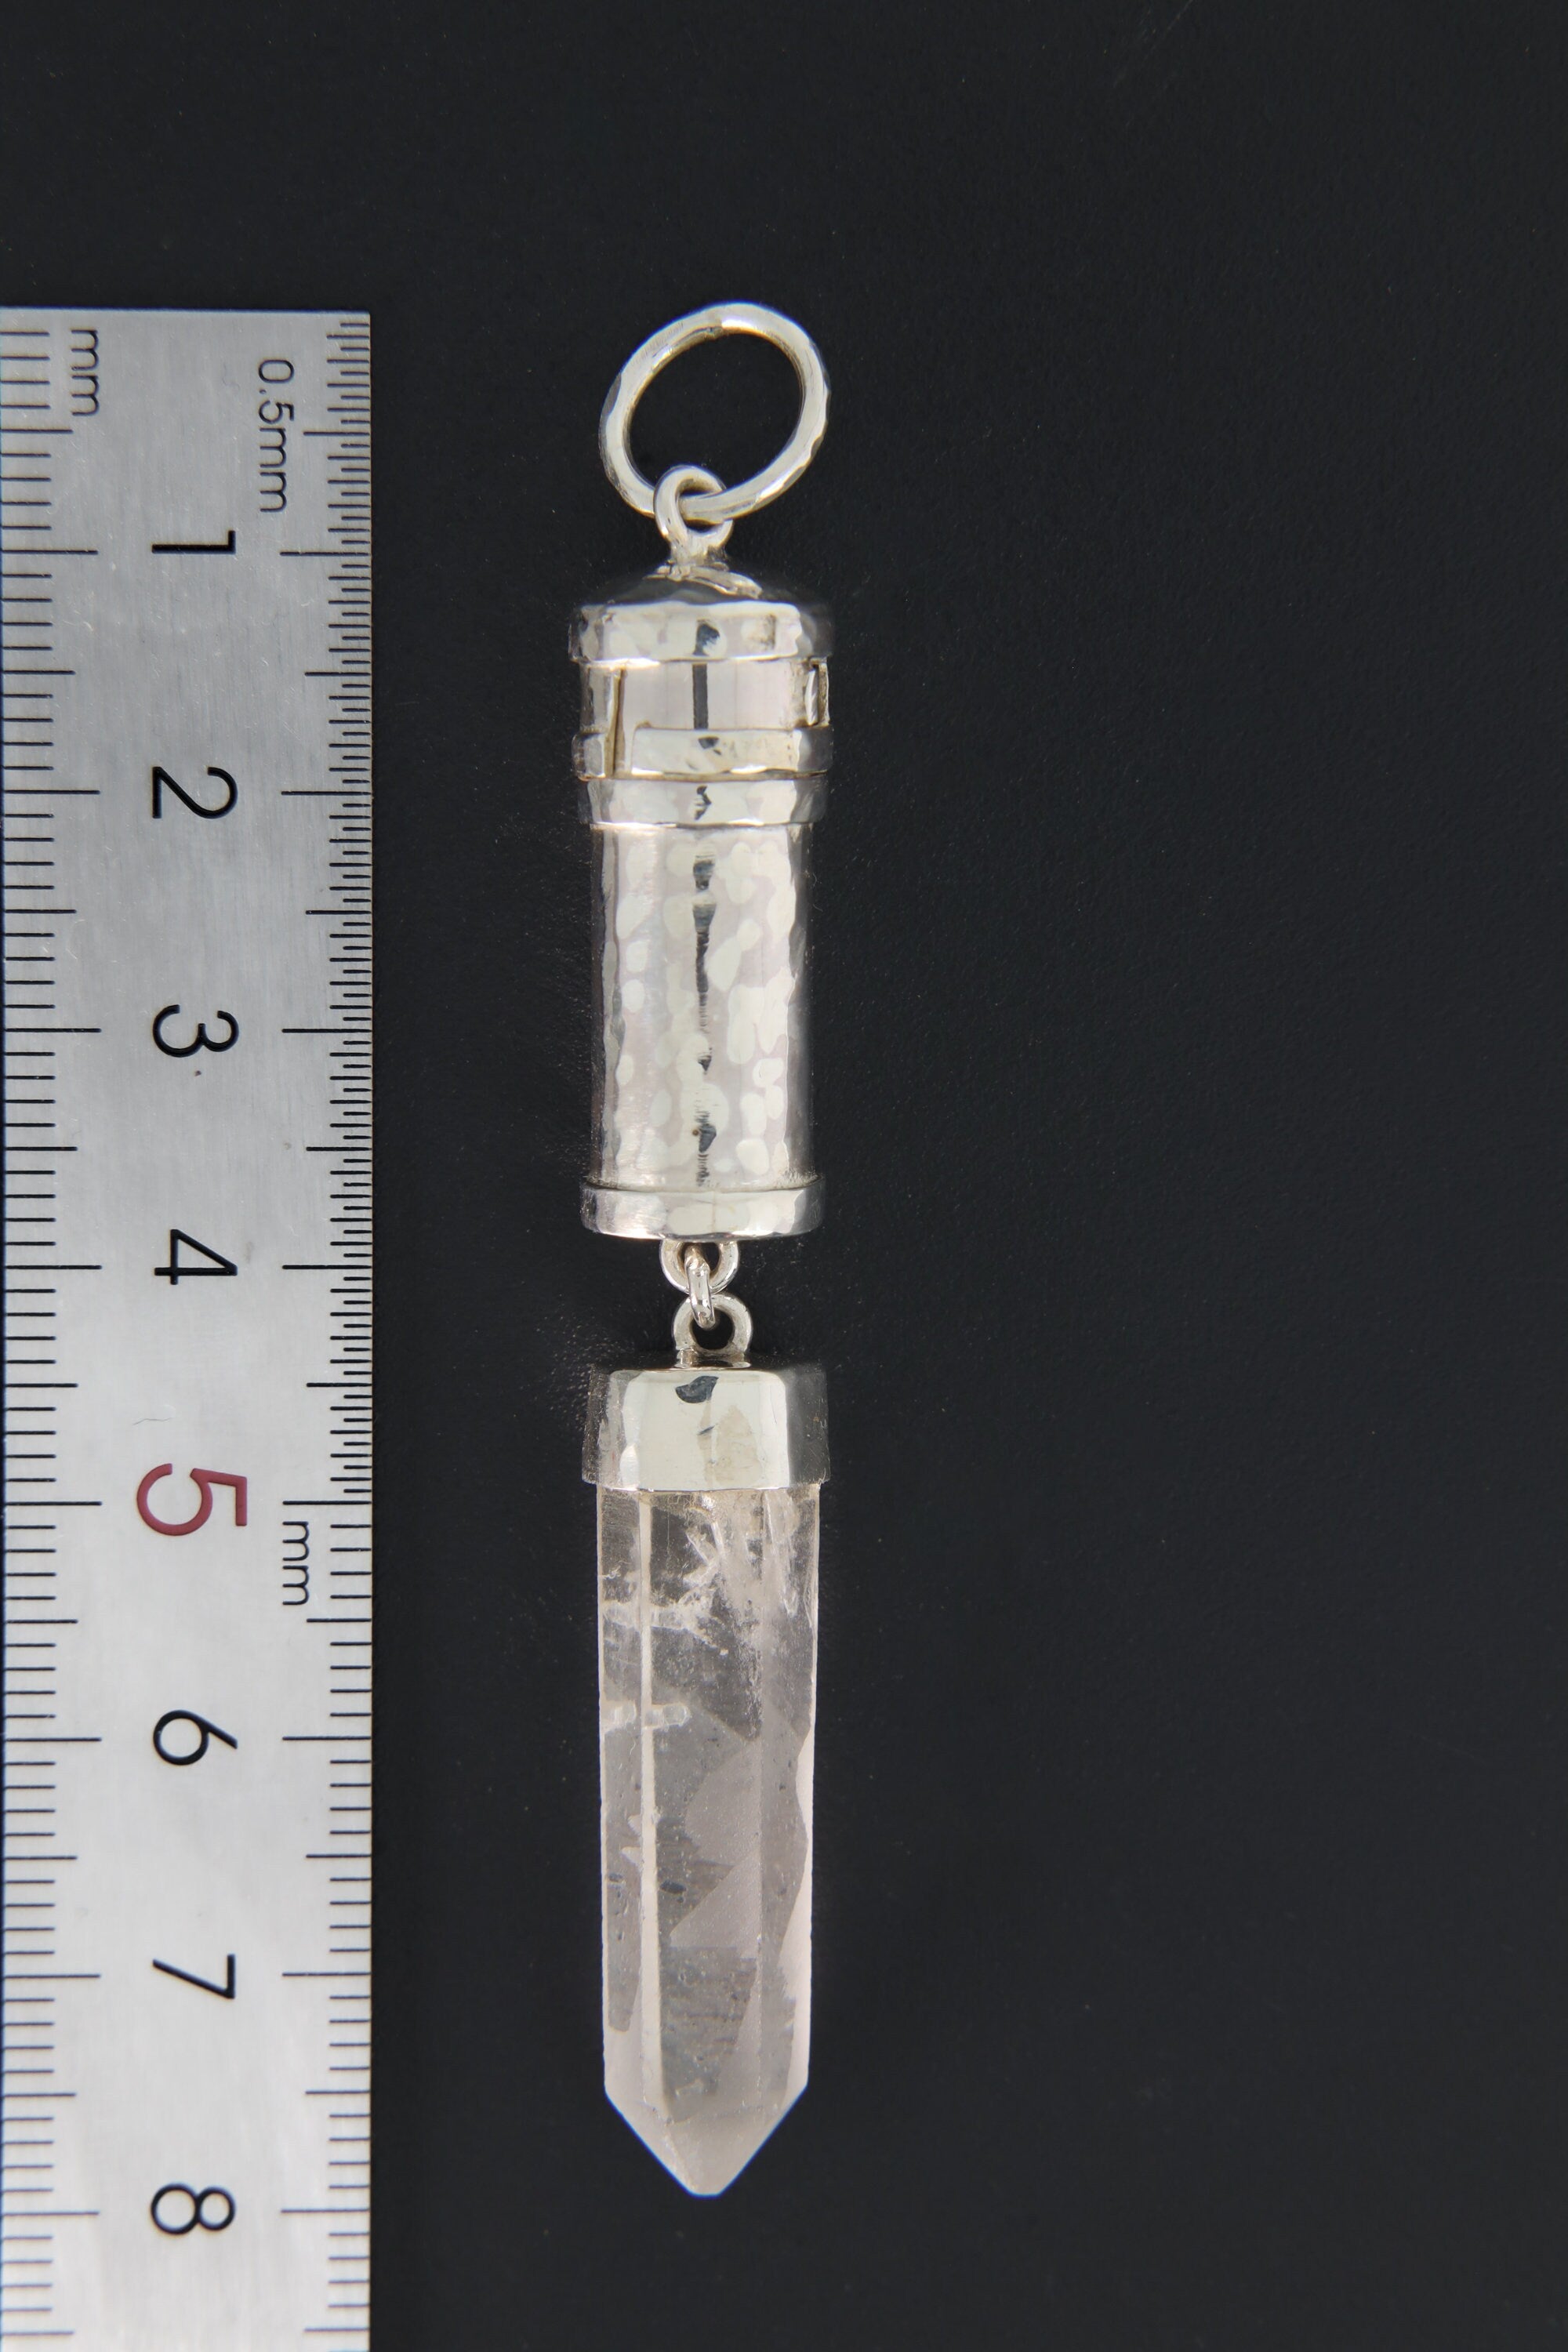 Fossicked Australian Clear Quartz Point - Sizable Solid Capsule Locket - Stash Urn - Textured & Sterling Silver Pendant